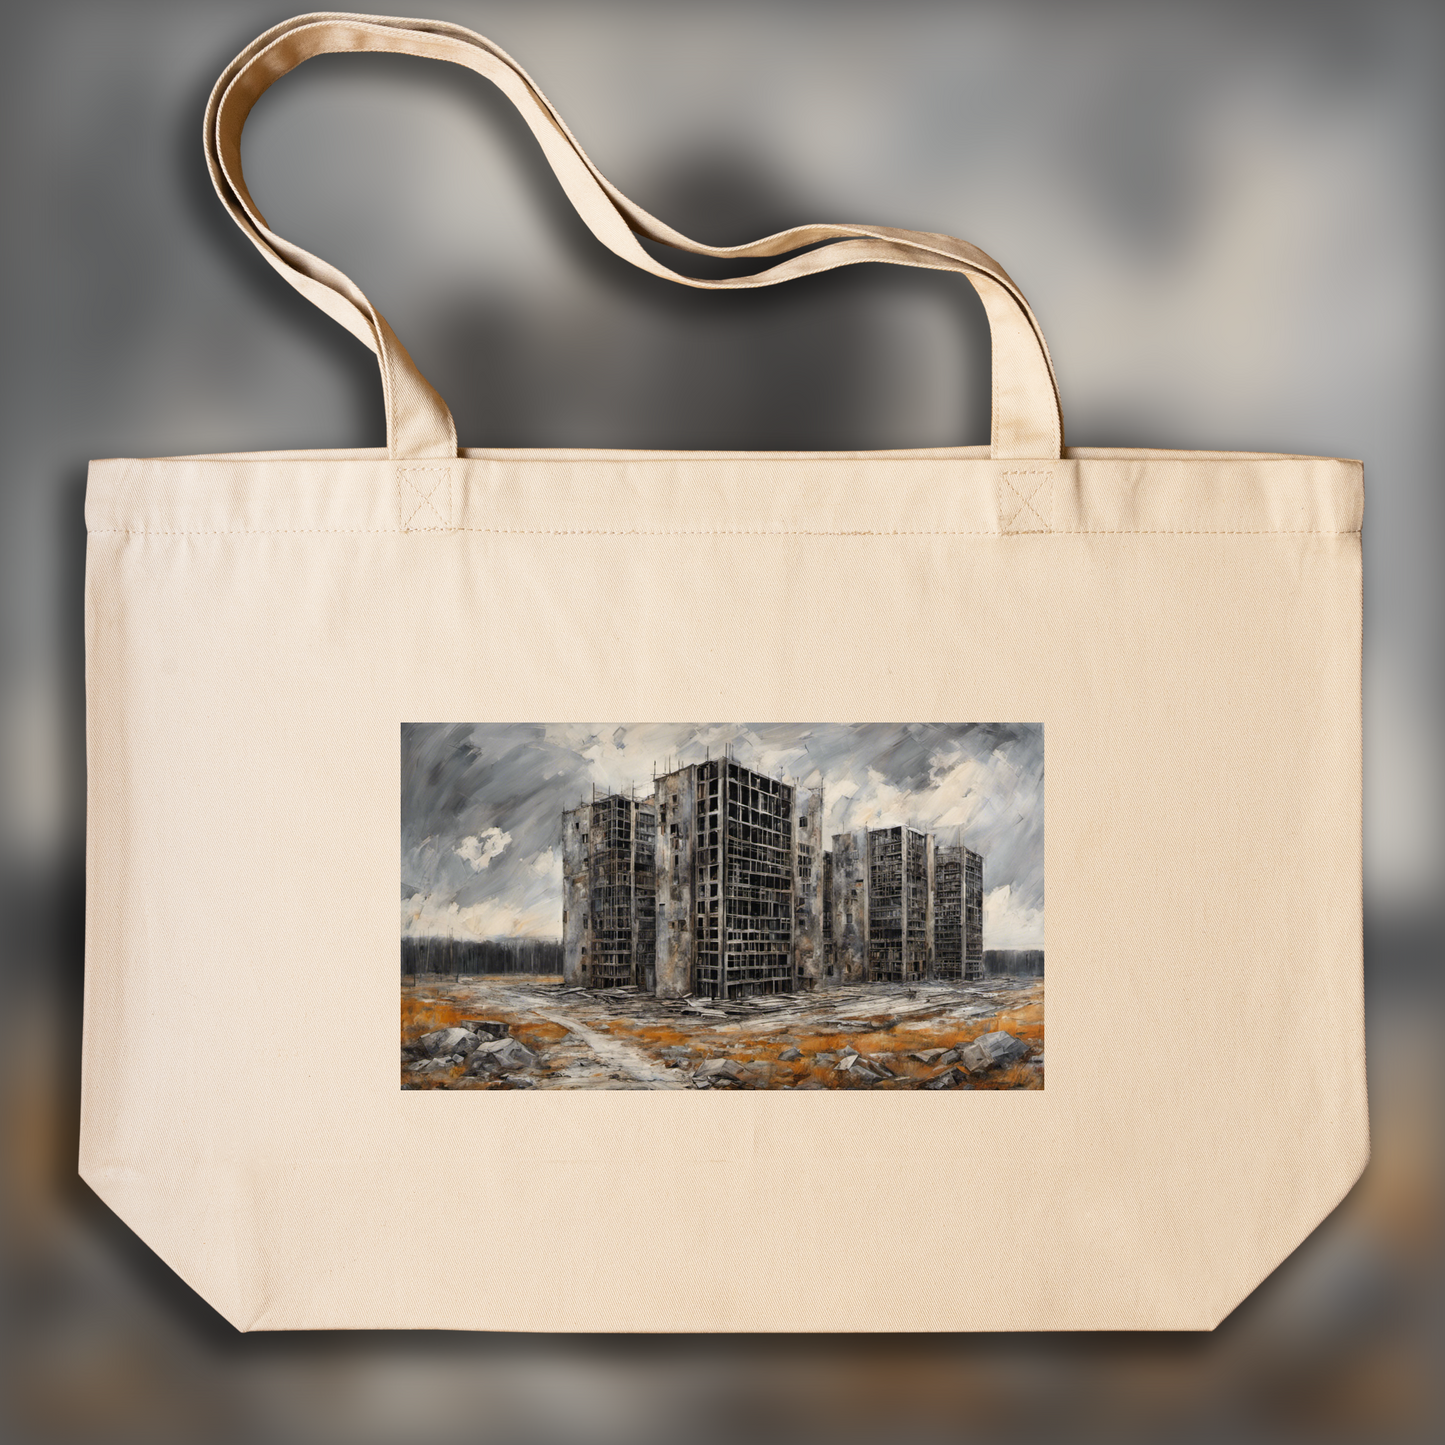 Tote bag large - Contemporary German neo-expressonism, Brutalist architecture, city - 1621212597